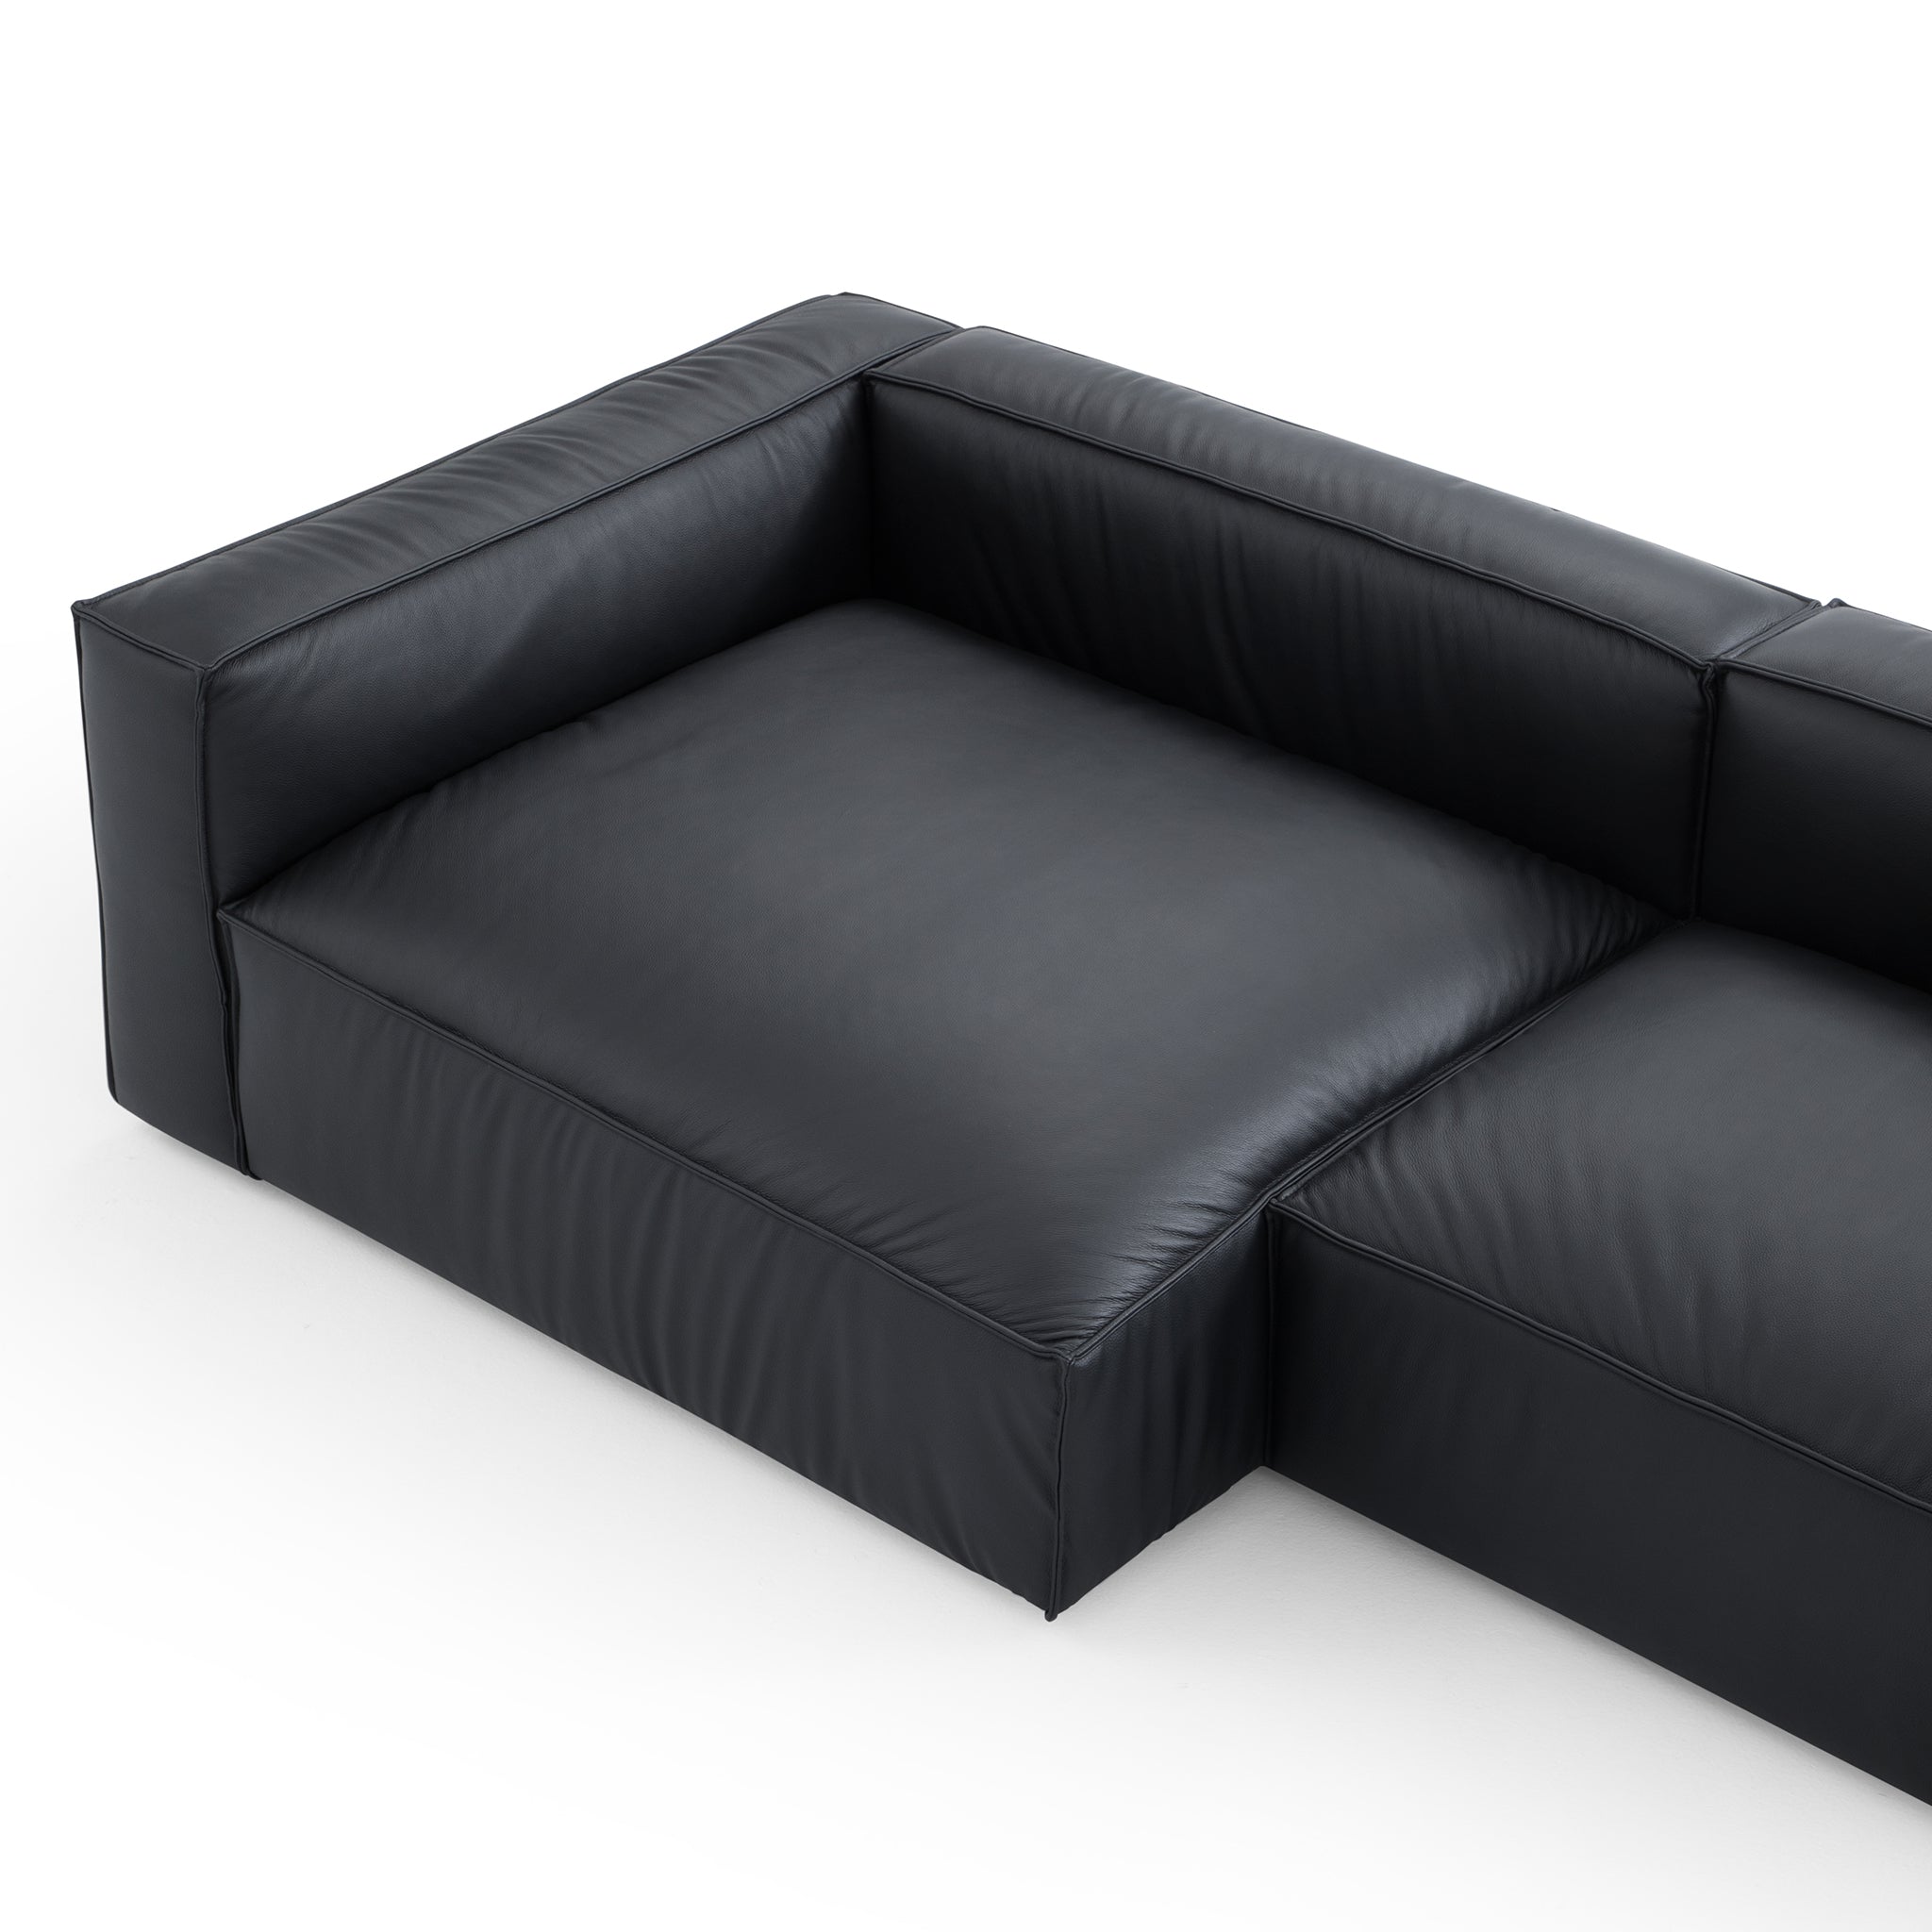 Luxury Minimalist Black Leather Sectional And Ottoman